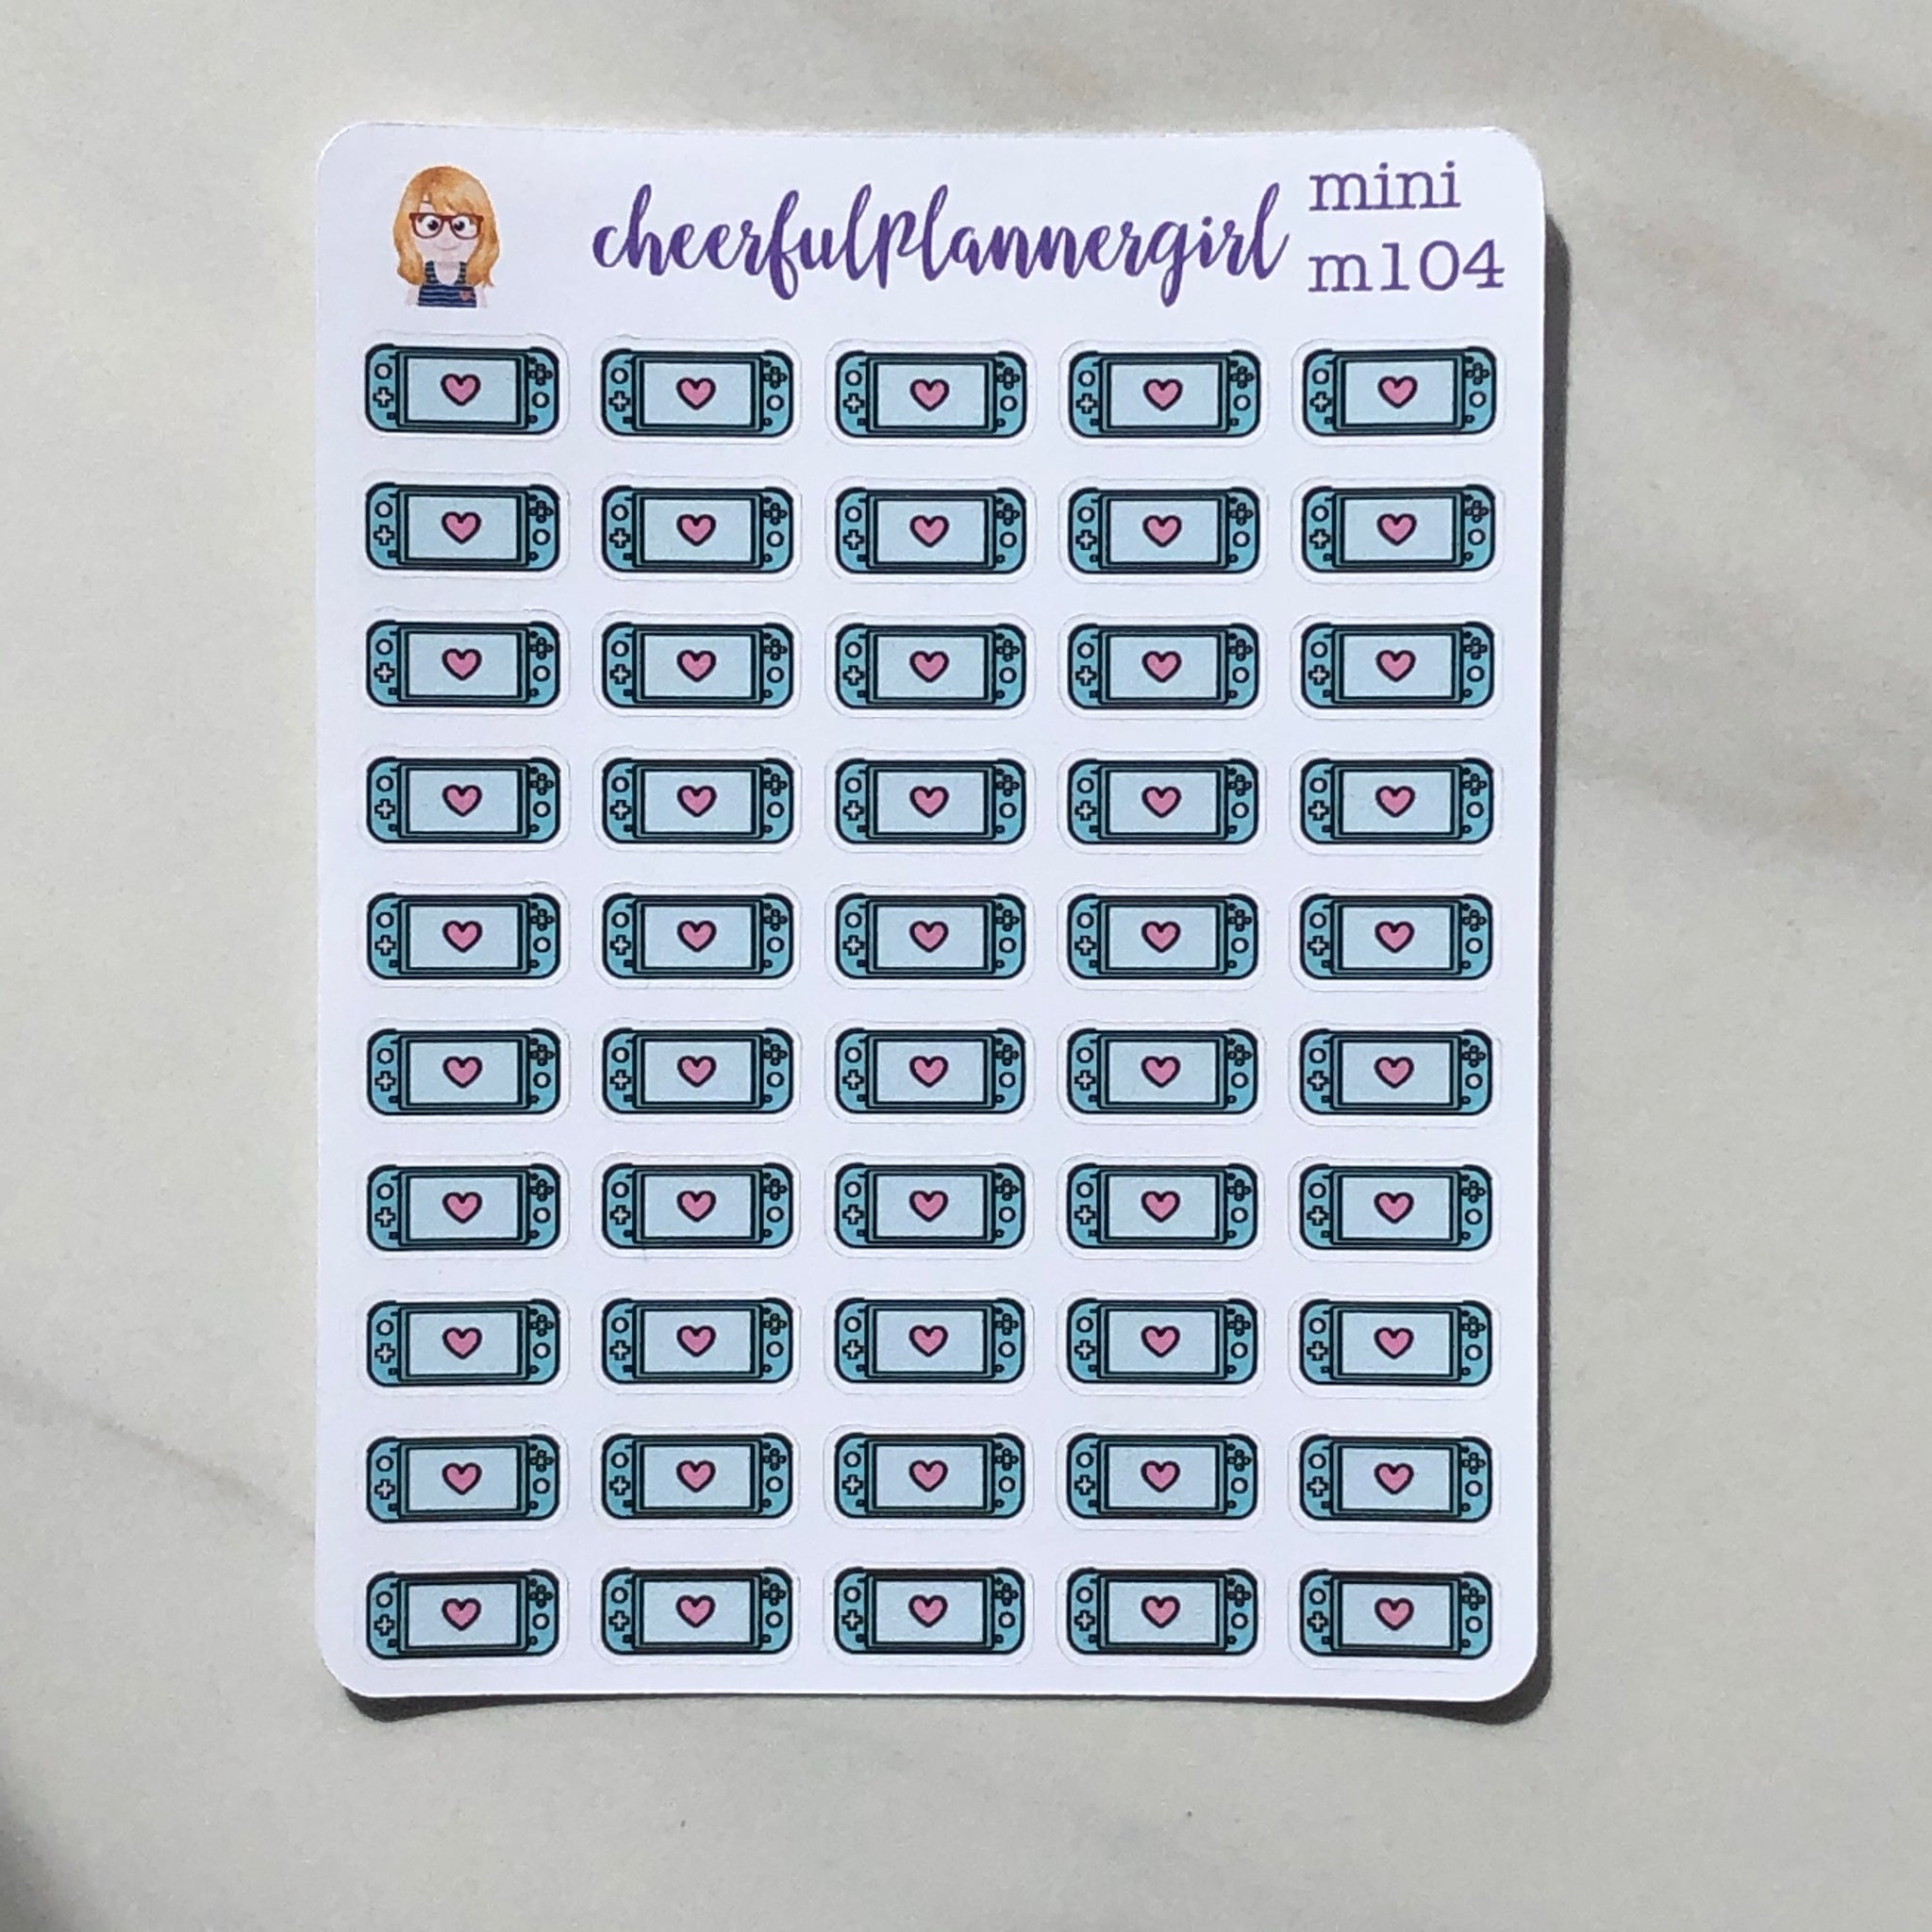 Teal Handheld Switch Planner Stickers